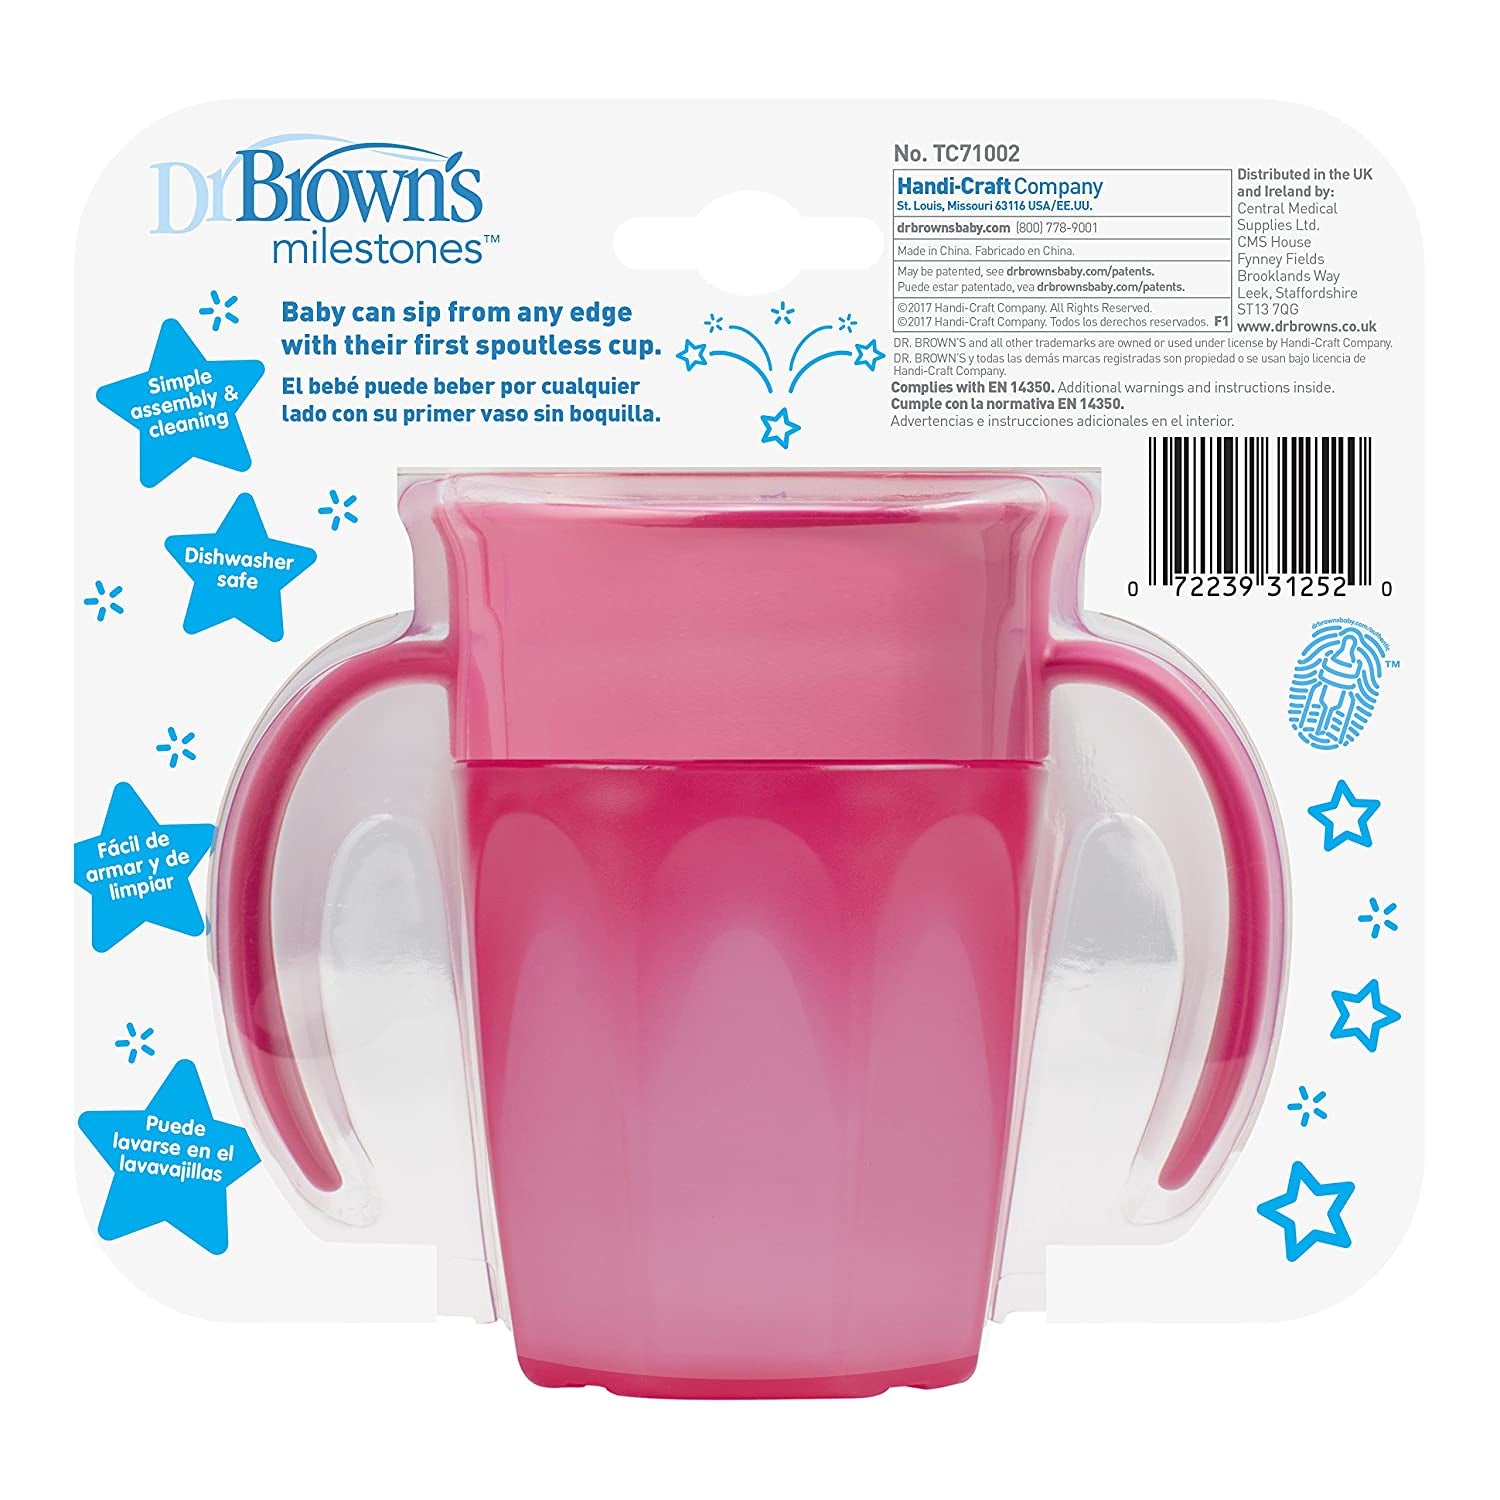 Dr. Browns Cheers 360 Spoutless Training Cup, 6m+, 7 Ounce